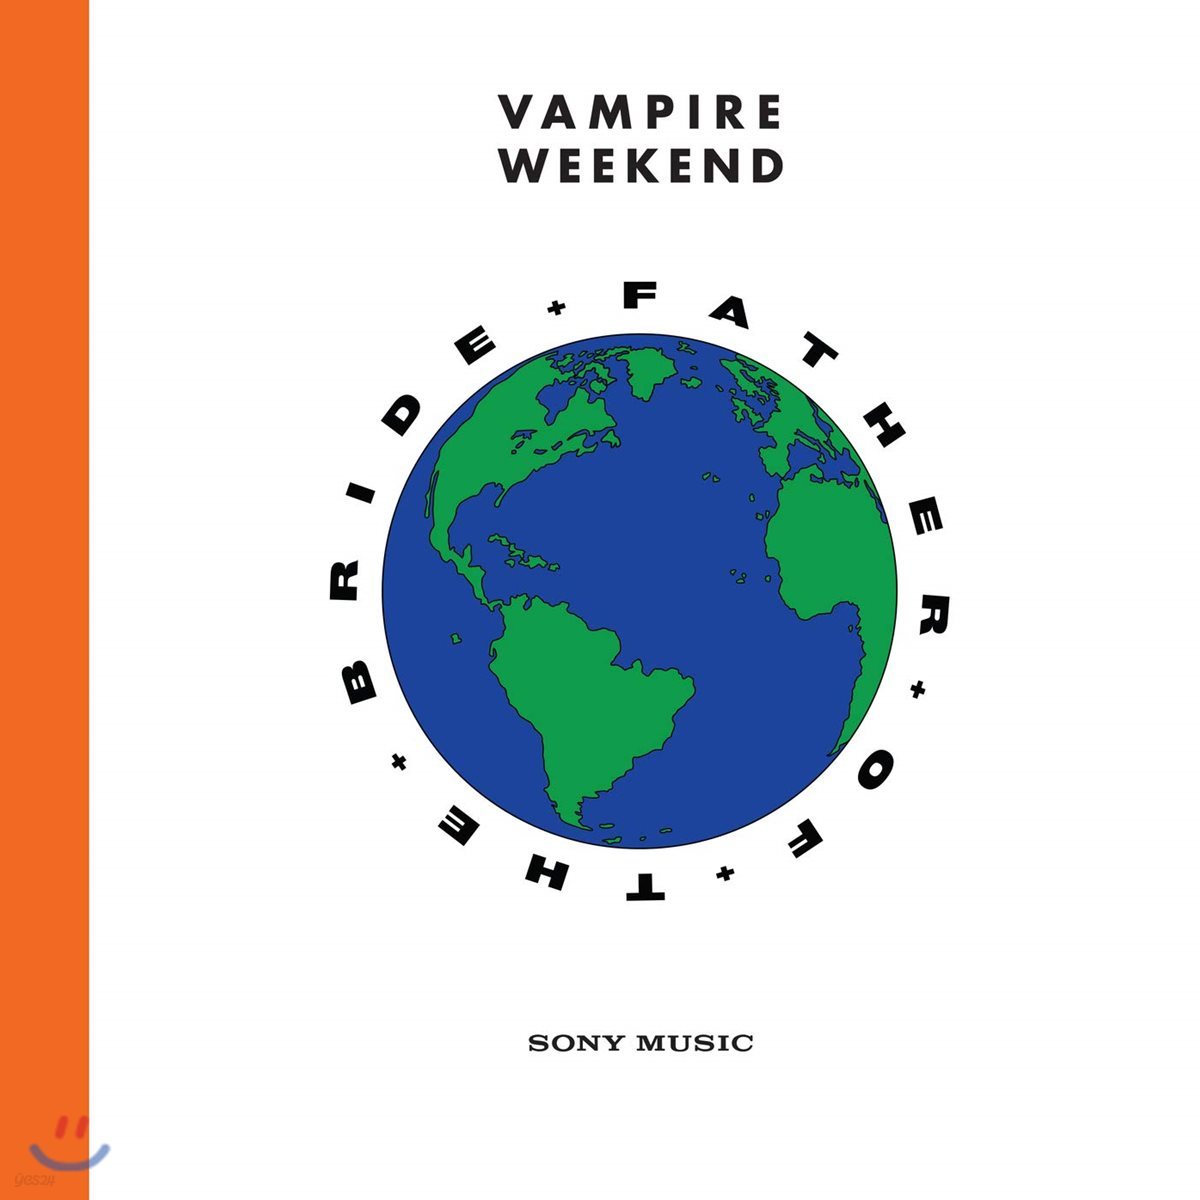 Vampire Weekend - Father of the Bride 뱀파이어 위켄드 정규 4집